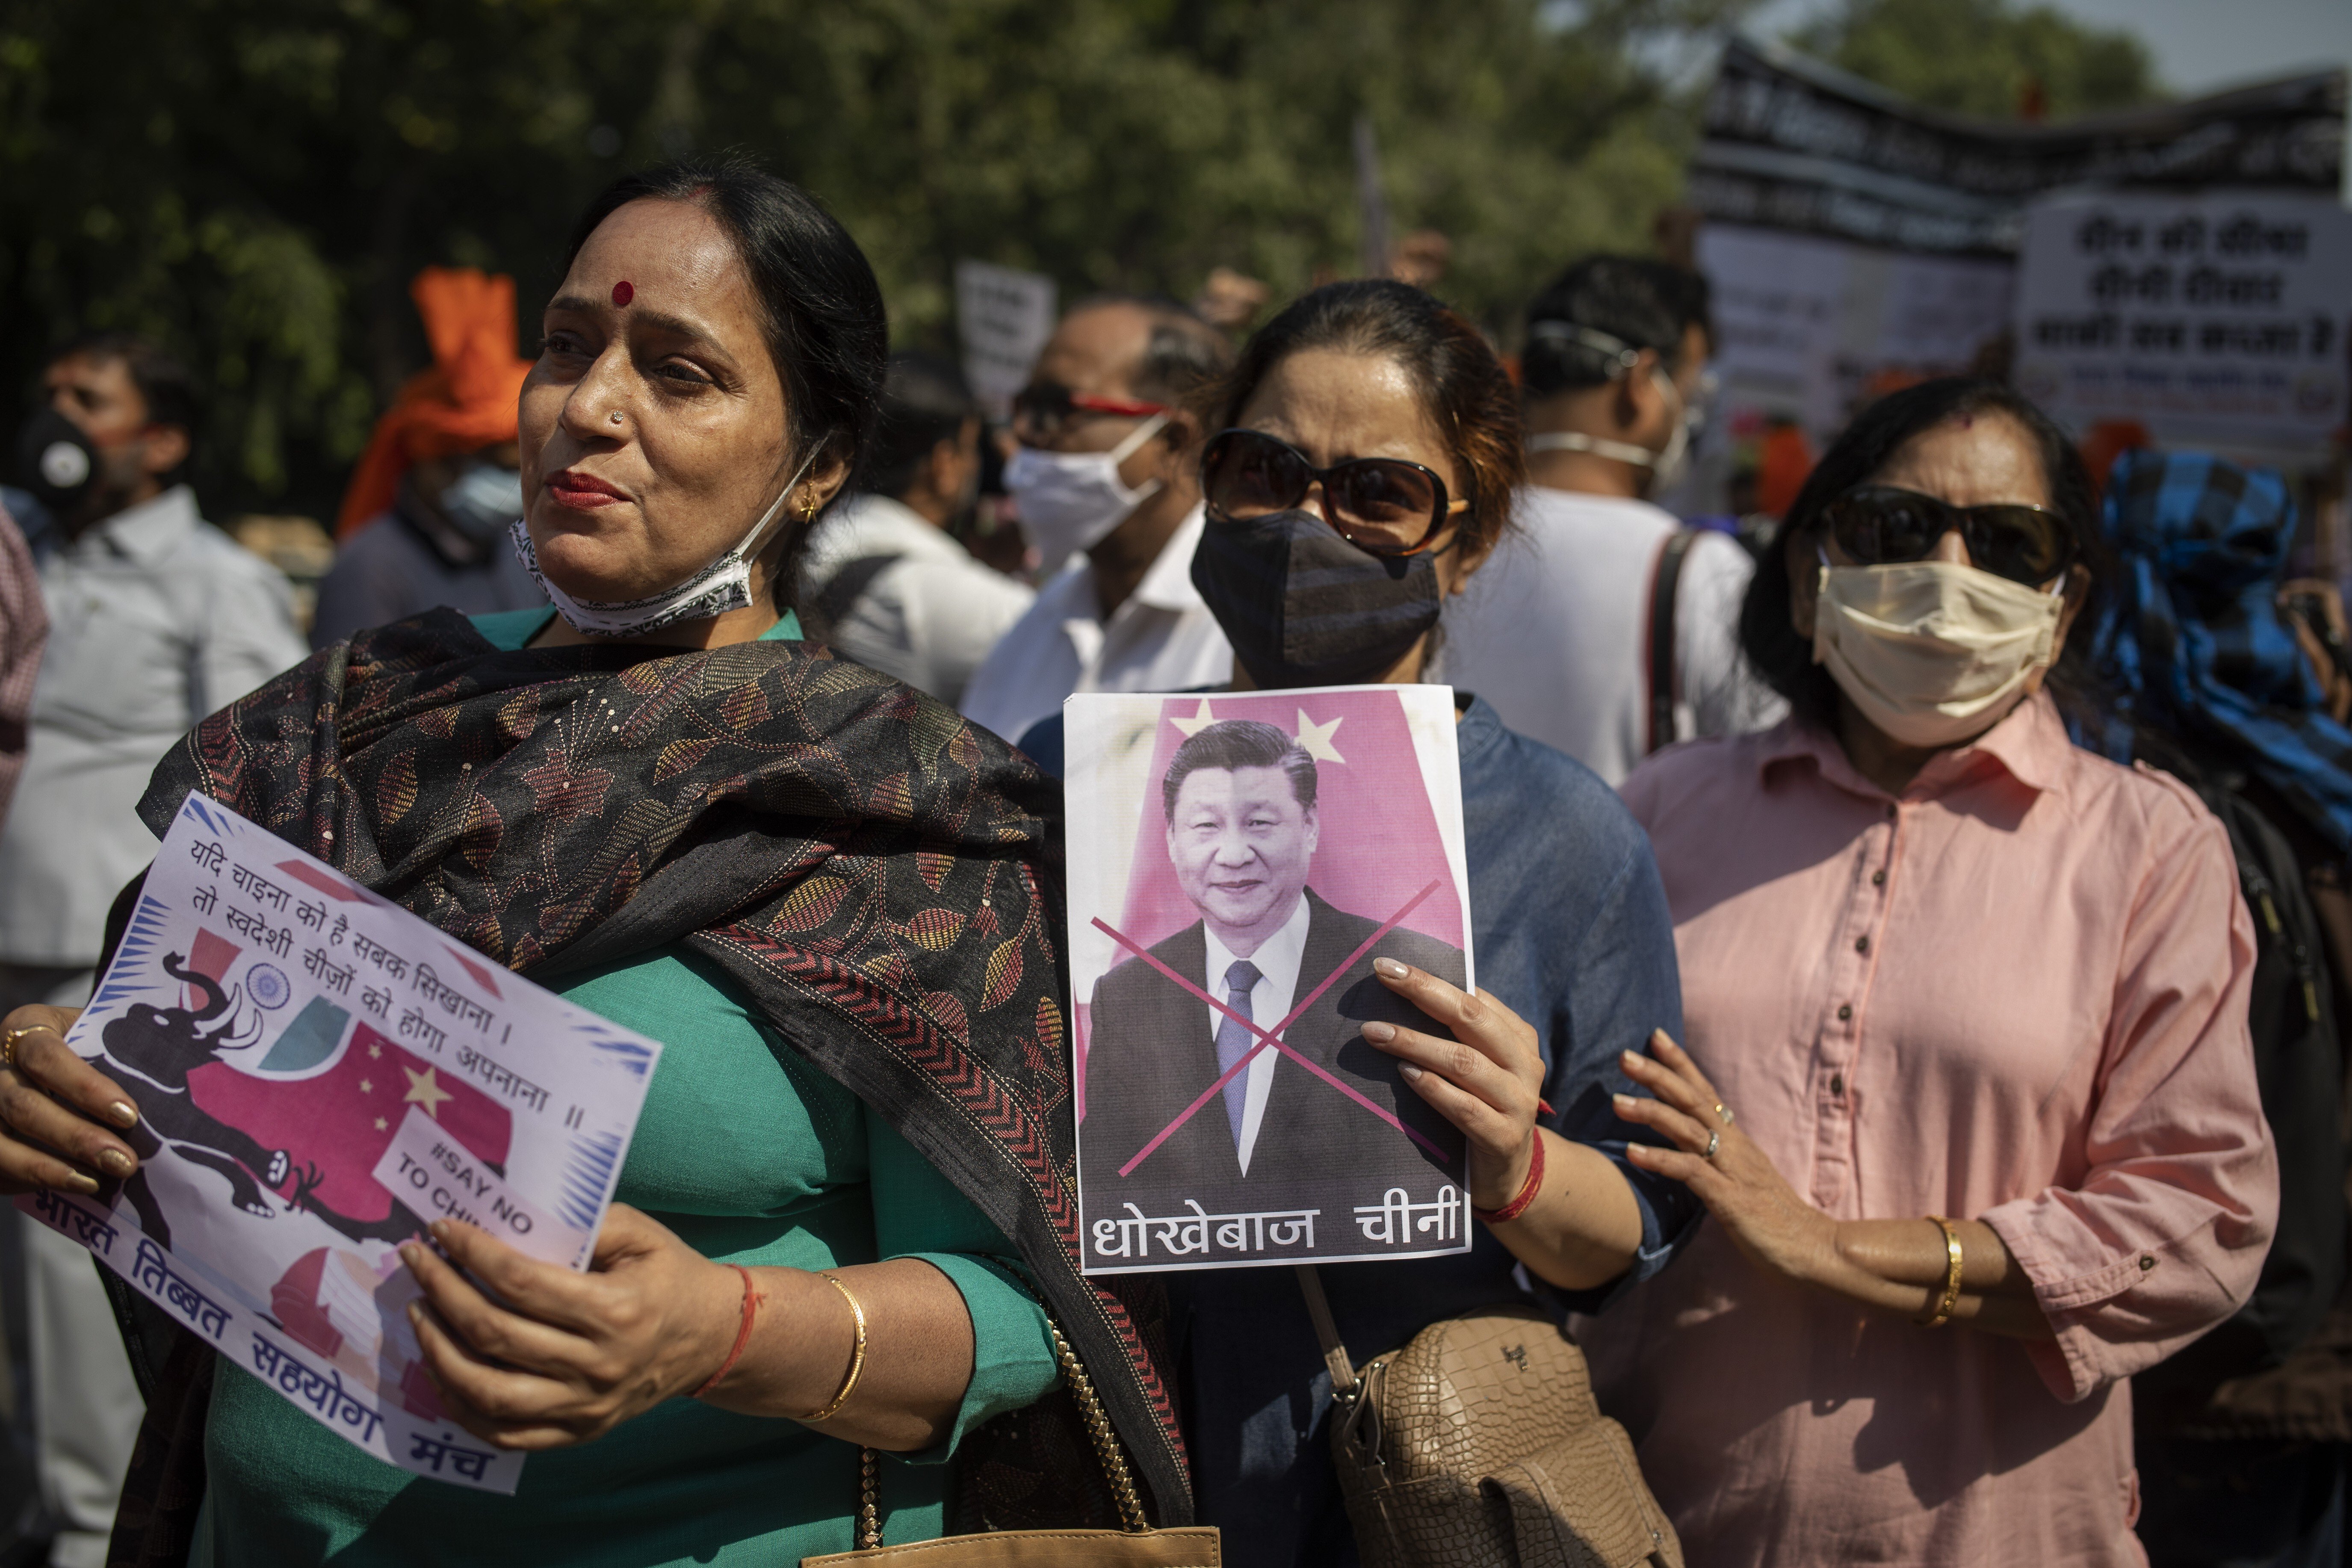 Indians, under the banner of Bharat Tibet Sahyog Manch, gather for a protest near the Chinese embassy in New Delhi on October 20. India’s leaders face a difficult balancing act between their desire for cooperation and trade with Beijing, and the public’s increasingly negative view of China. Photo: AP